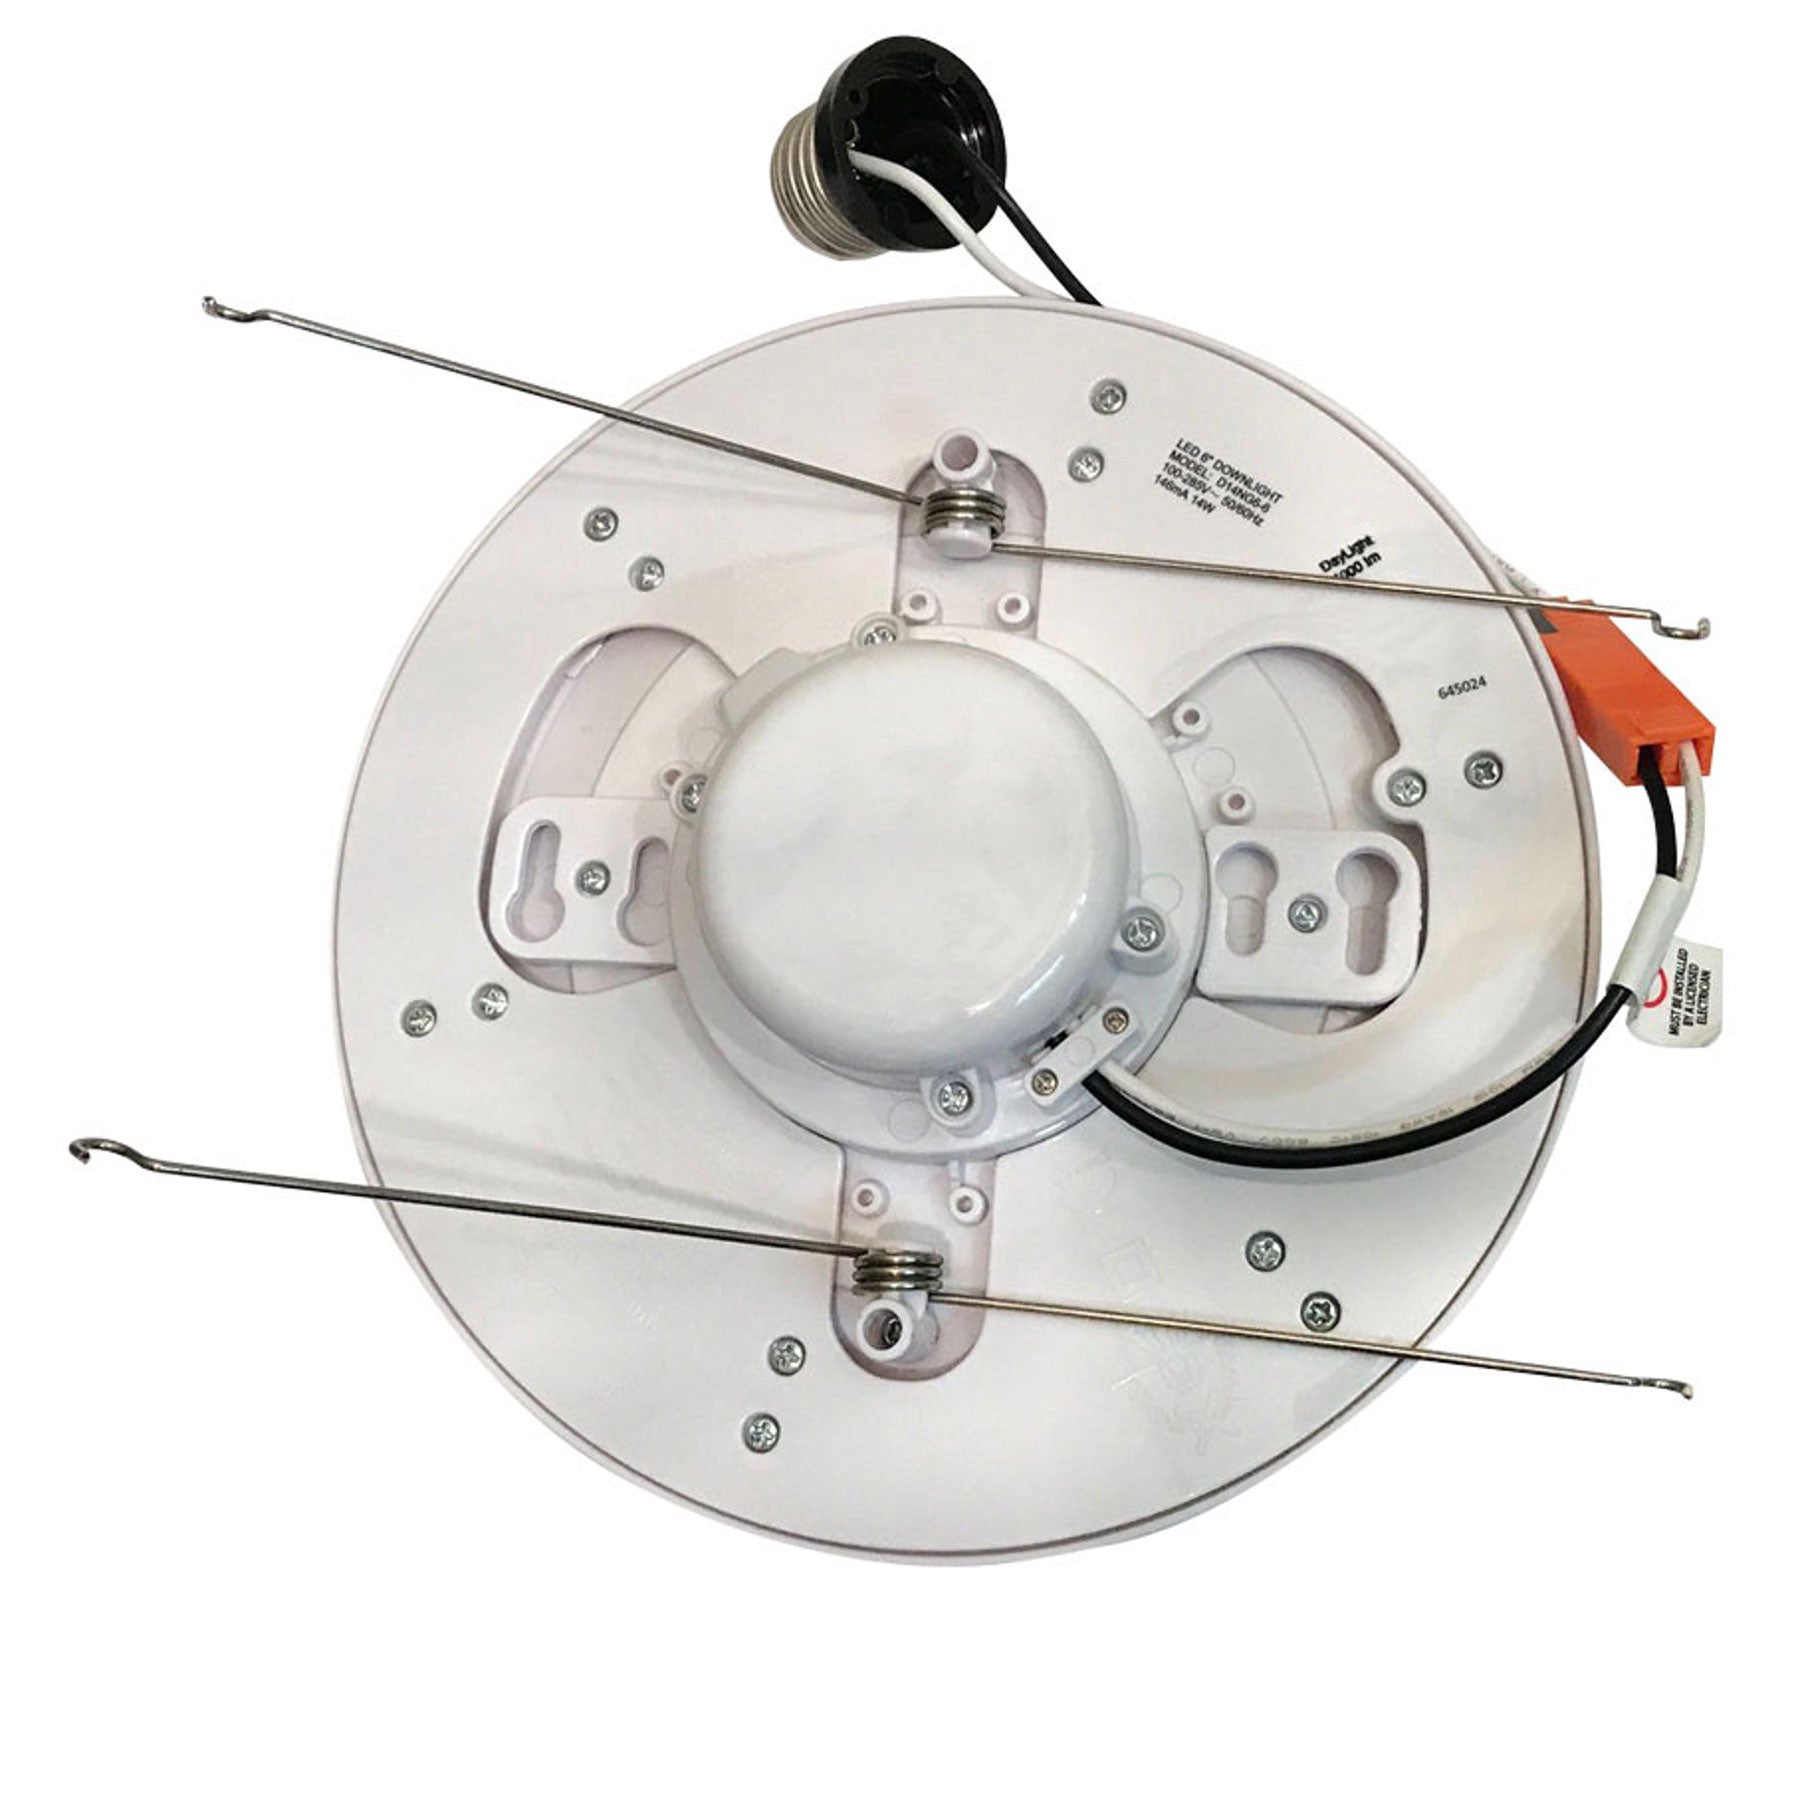 LED light disc with $167.75 lifetime energy savings, offering long-term cost efficiency